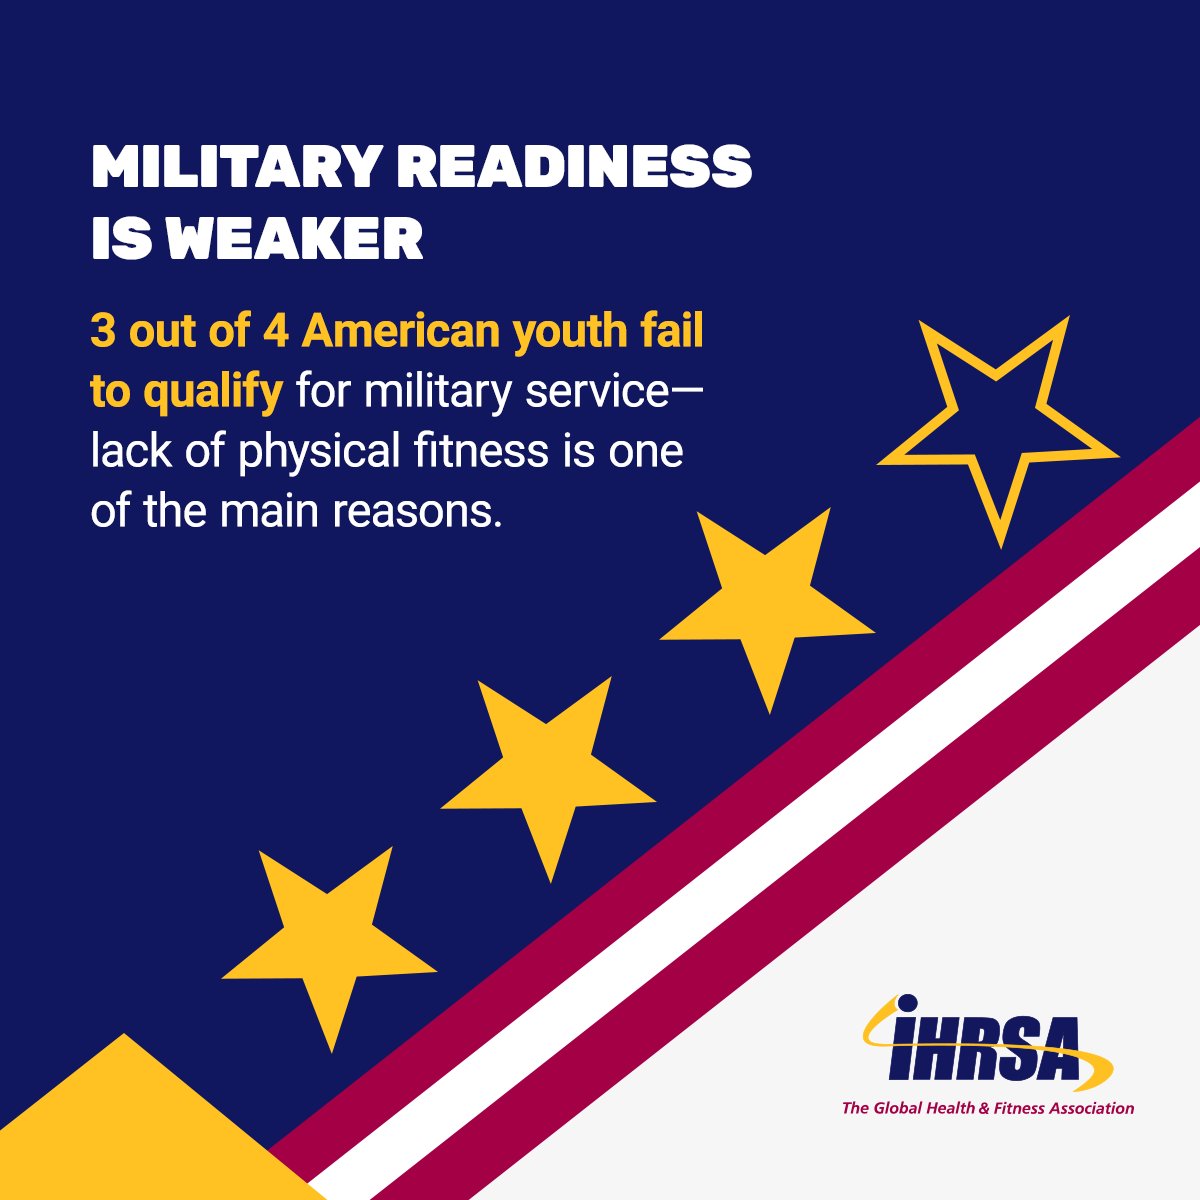 America’s #military failed to meet recruitment goals during the past few years, partly due to lack of physical fitness among recruits. Help improve our #militaryreadiness by urging Congress to co-sponsor the PHIT Act, which would allow FSAs and HSAs to cover the cost of...